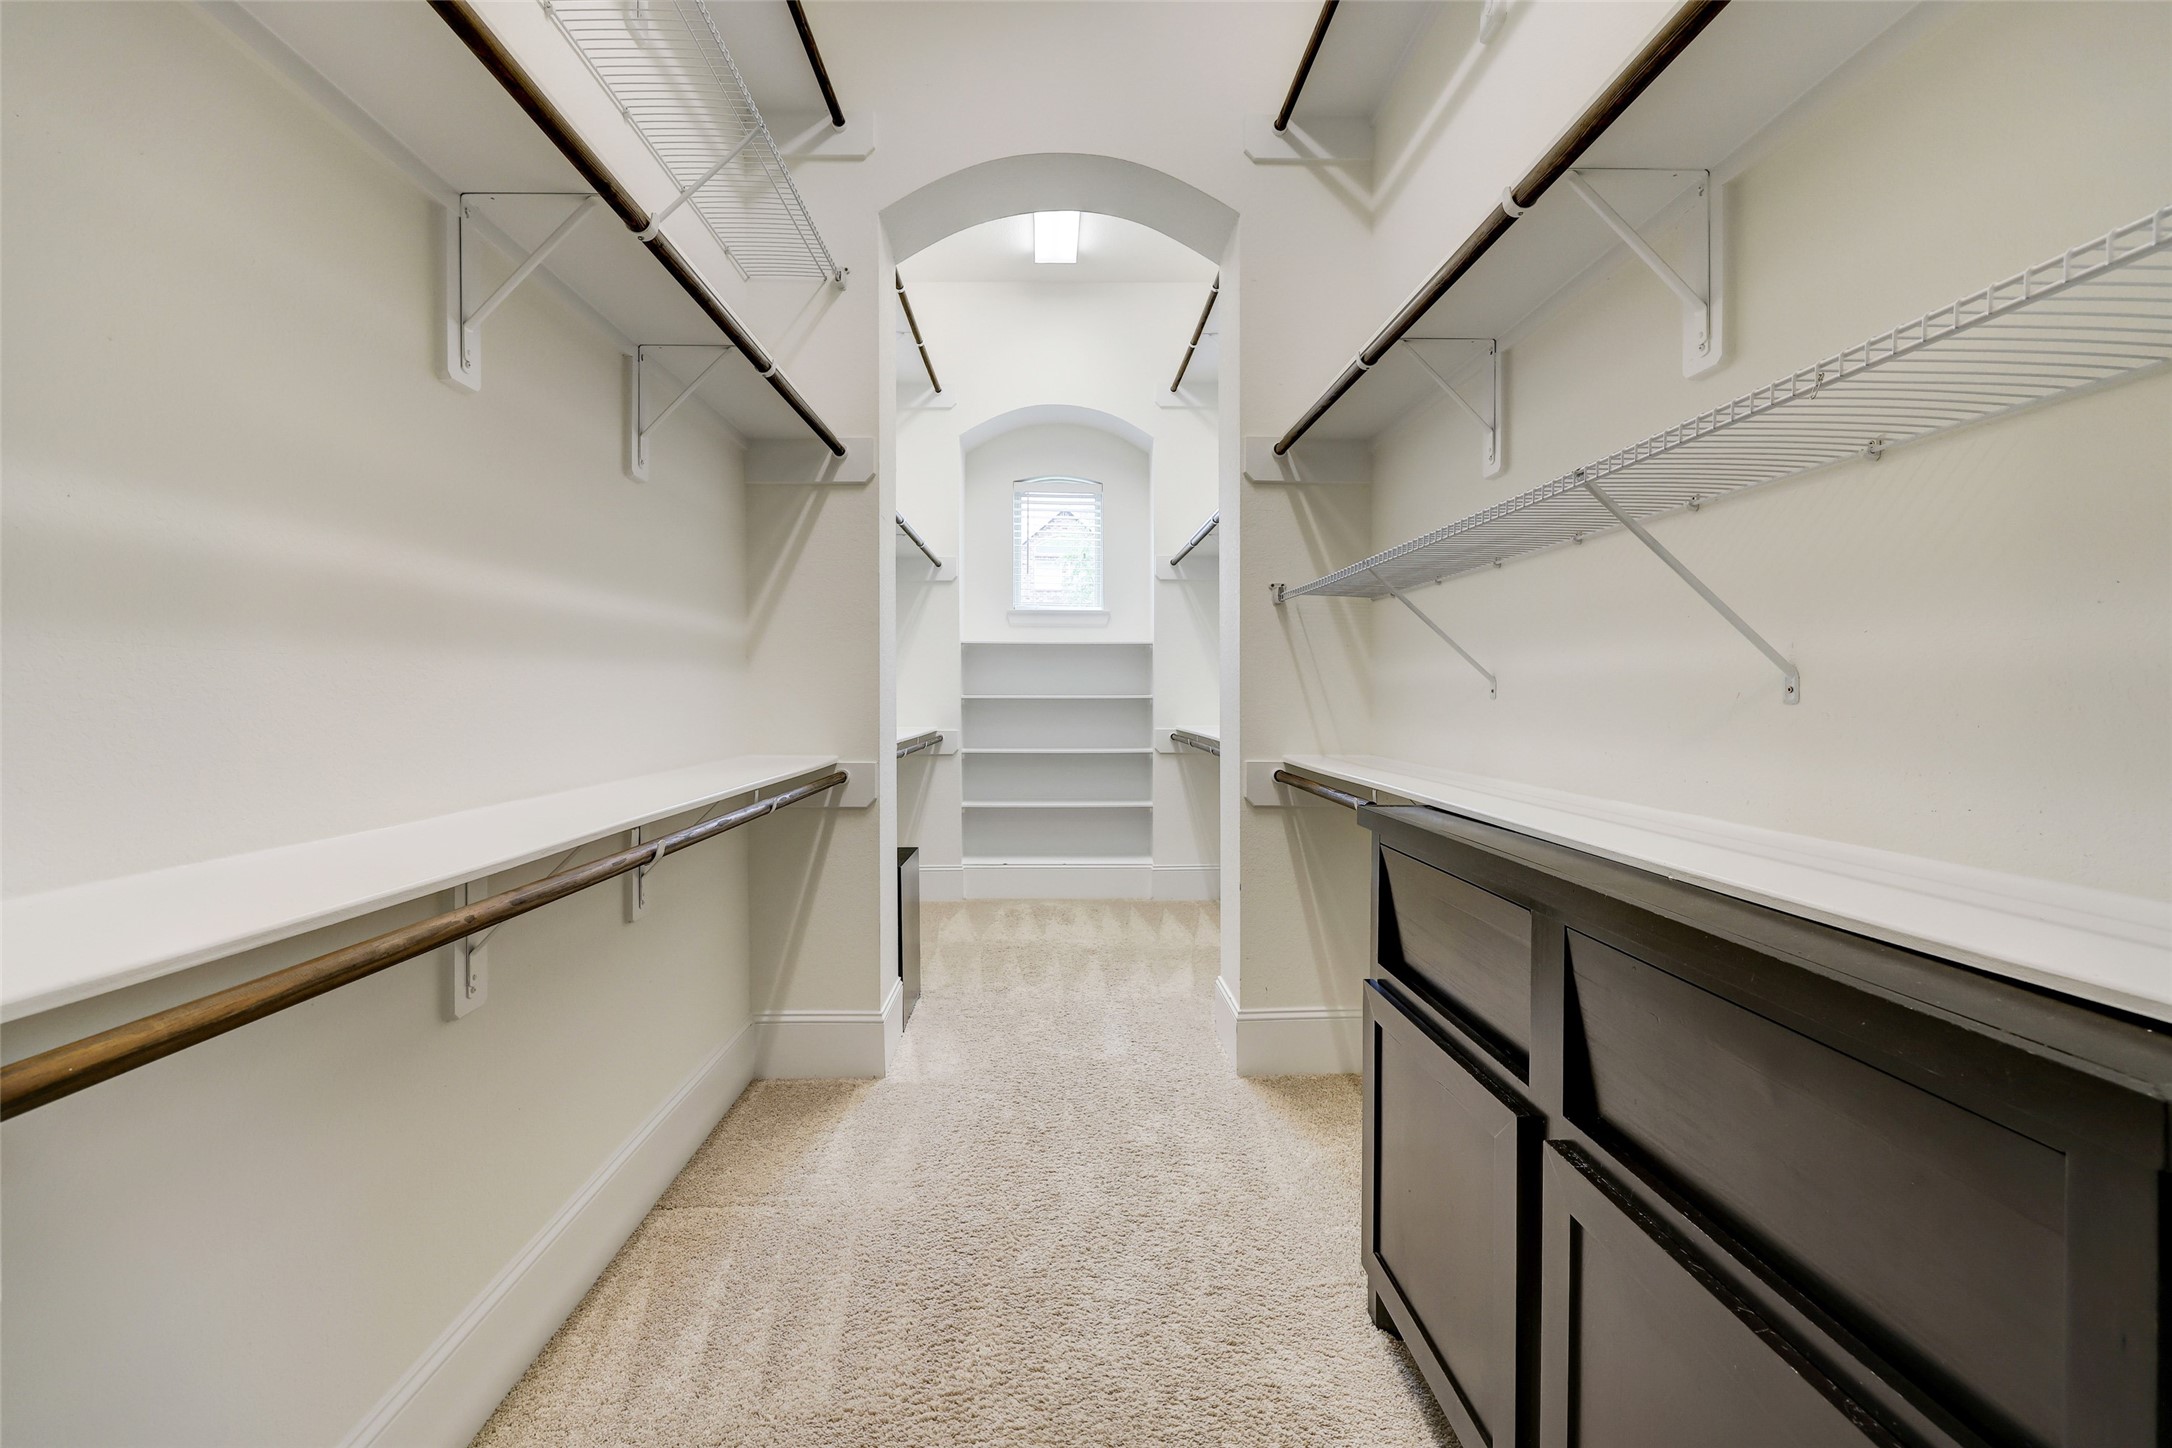 The Primary Suite closet offers built-ins, ample hanging space and additional overhead storage.